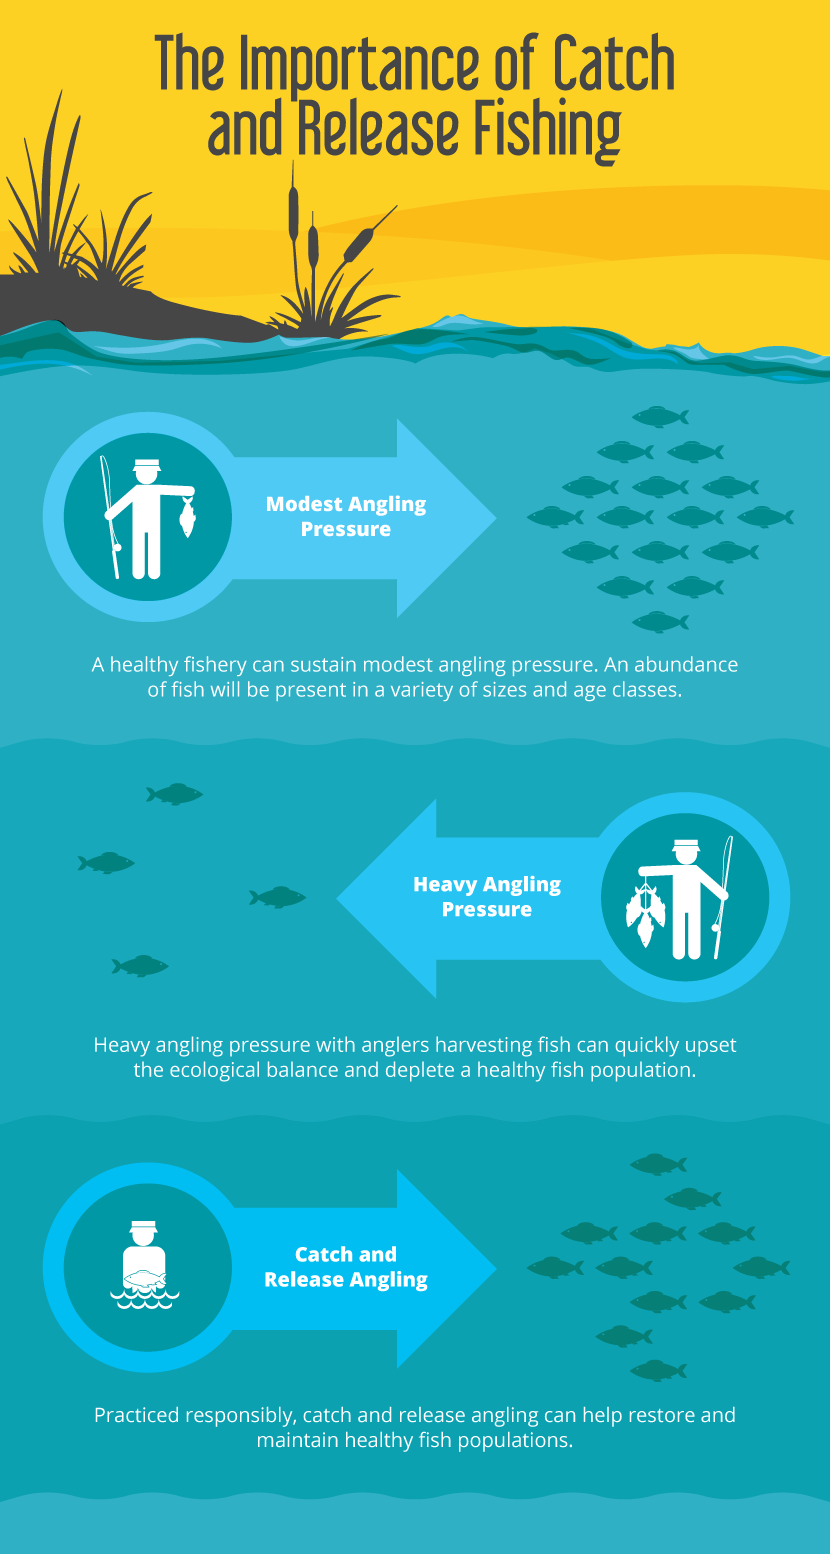 How to Catch & Release Fish Safely & Responsibly